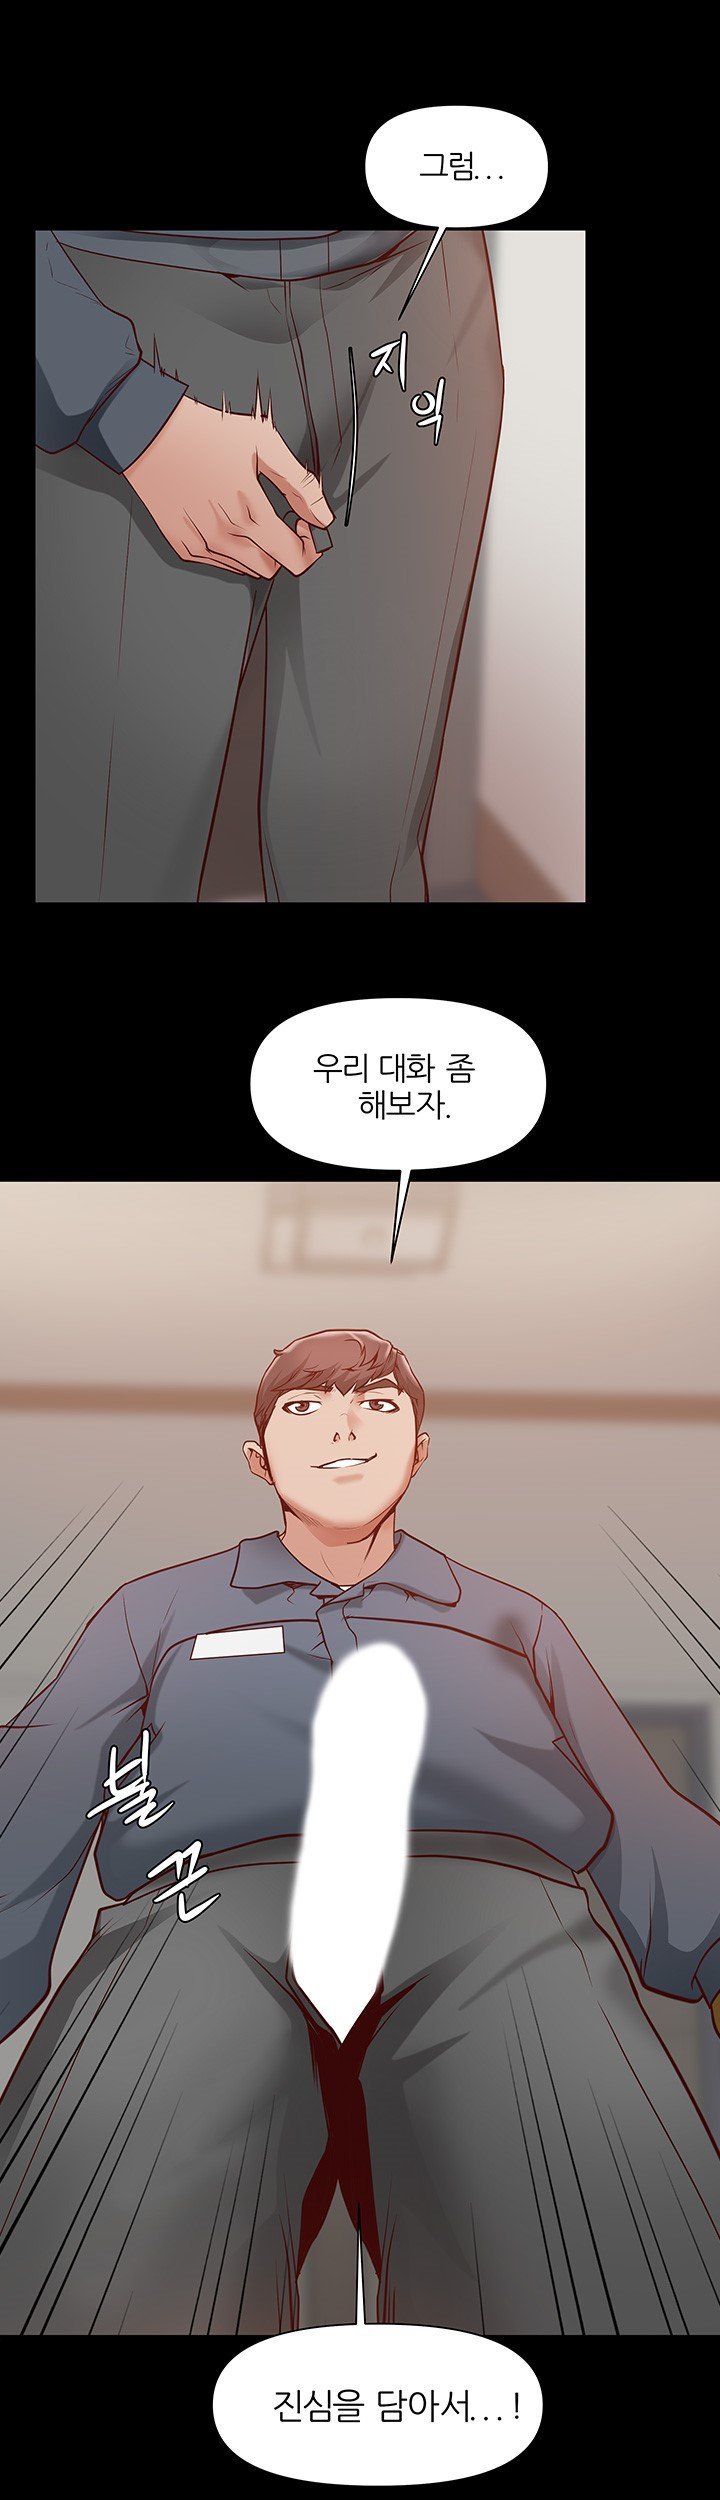 bs-anger-raw-chap-2-21